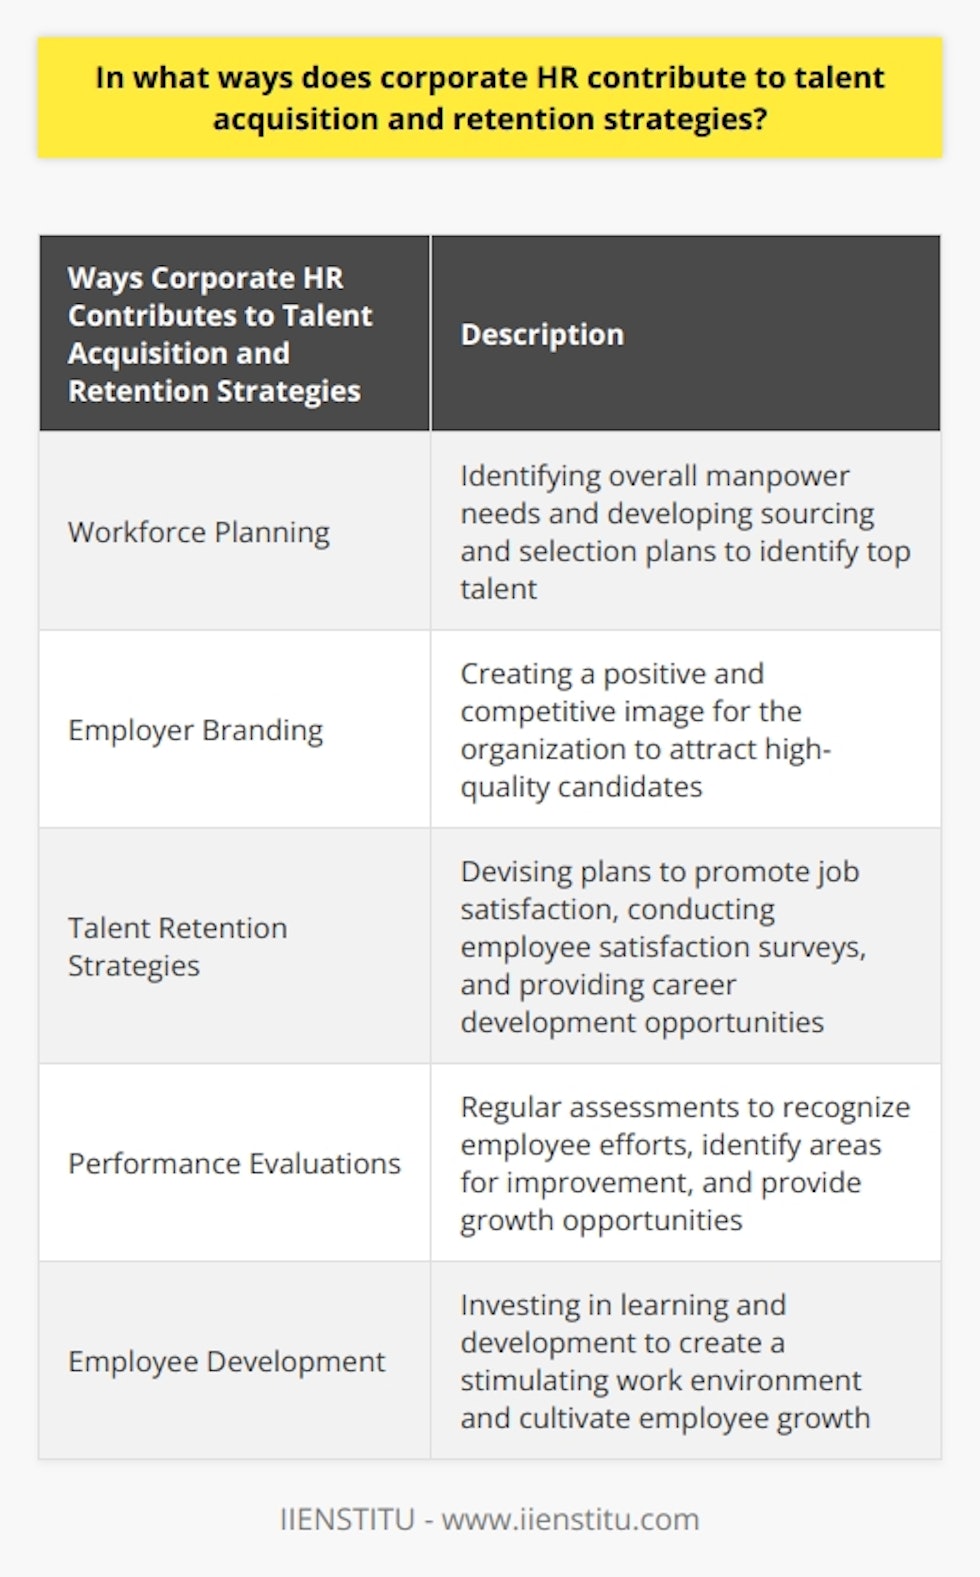 Corporate HR plays a crucial role in talent acquisition and retention strategies. Firstly, HR actively participates in workforce planning, which involves identifying the overall manpower needs within the organization. By predicting the skillsets required, HR can develop relevant sourcing and selection plans to identify top talent that aligns with the company's missions and goals. This enables organizations to allocate resources efficiently, maximizing productivity and fueling growth.HR also plays a significant role in promoting employer branding. By creating a positive and competitive image for the organization, HR can attract high-quality candidates who are motivated to work within the company culture. This may involve managing the company's online presence, creating attractive job advertisements, and participating in networking events. Strong branding increases the success rates in securing top talent and establishing a cohesive workforce.Furthermore, HR contributes to talent retention strategies by devising plans that promote job satisfaction and prevent turnover. Employee satisfaction surveys and exit interviews provide valuable insights into the organization's strengths and weaknesses, which HR can use to develop improvement plans. HR professionals also foster employee engagement by providing timely feedback and career development opportunities. This builds loyalty and commitment within the workforce, ultimately enhancing talent retention.Regular performance evaluations and benchmarking exercises are crucial in talent acquisition and retention. These evaluations ensure that employees receive recognition for their efforts and are objectively assessed. It also helps identify areas for improvement and provides direction for growth opportunities. When employees are aware of their performance metrics, they can better align with company goals and contribute to organizational success.Moreover, corporate HR invests in the learning and development of its employees, which directly correlates with talent retention. By providing ongoing training opportunities and encouraging employees to hone their skills, HR creates a stimulating work environment where employees can grow professionally. This investment demonstrates the company's commitment to the success of its employees and cultivates a nurturing atmosphere where top talent can thrive.In conclusion, corporate HR significantly contributes to talent acquisition and retention through effective workforce planning, promoting employer branding, enhancing retention strategies, conducting performance evaluations, and investing in employee development. These strategic measures enable organizations to attract, engage, and retain top talent in today's competitive marketplace.